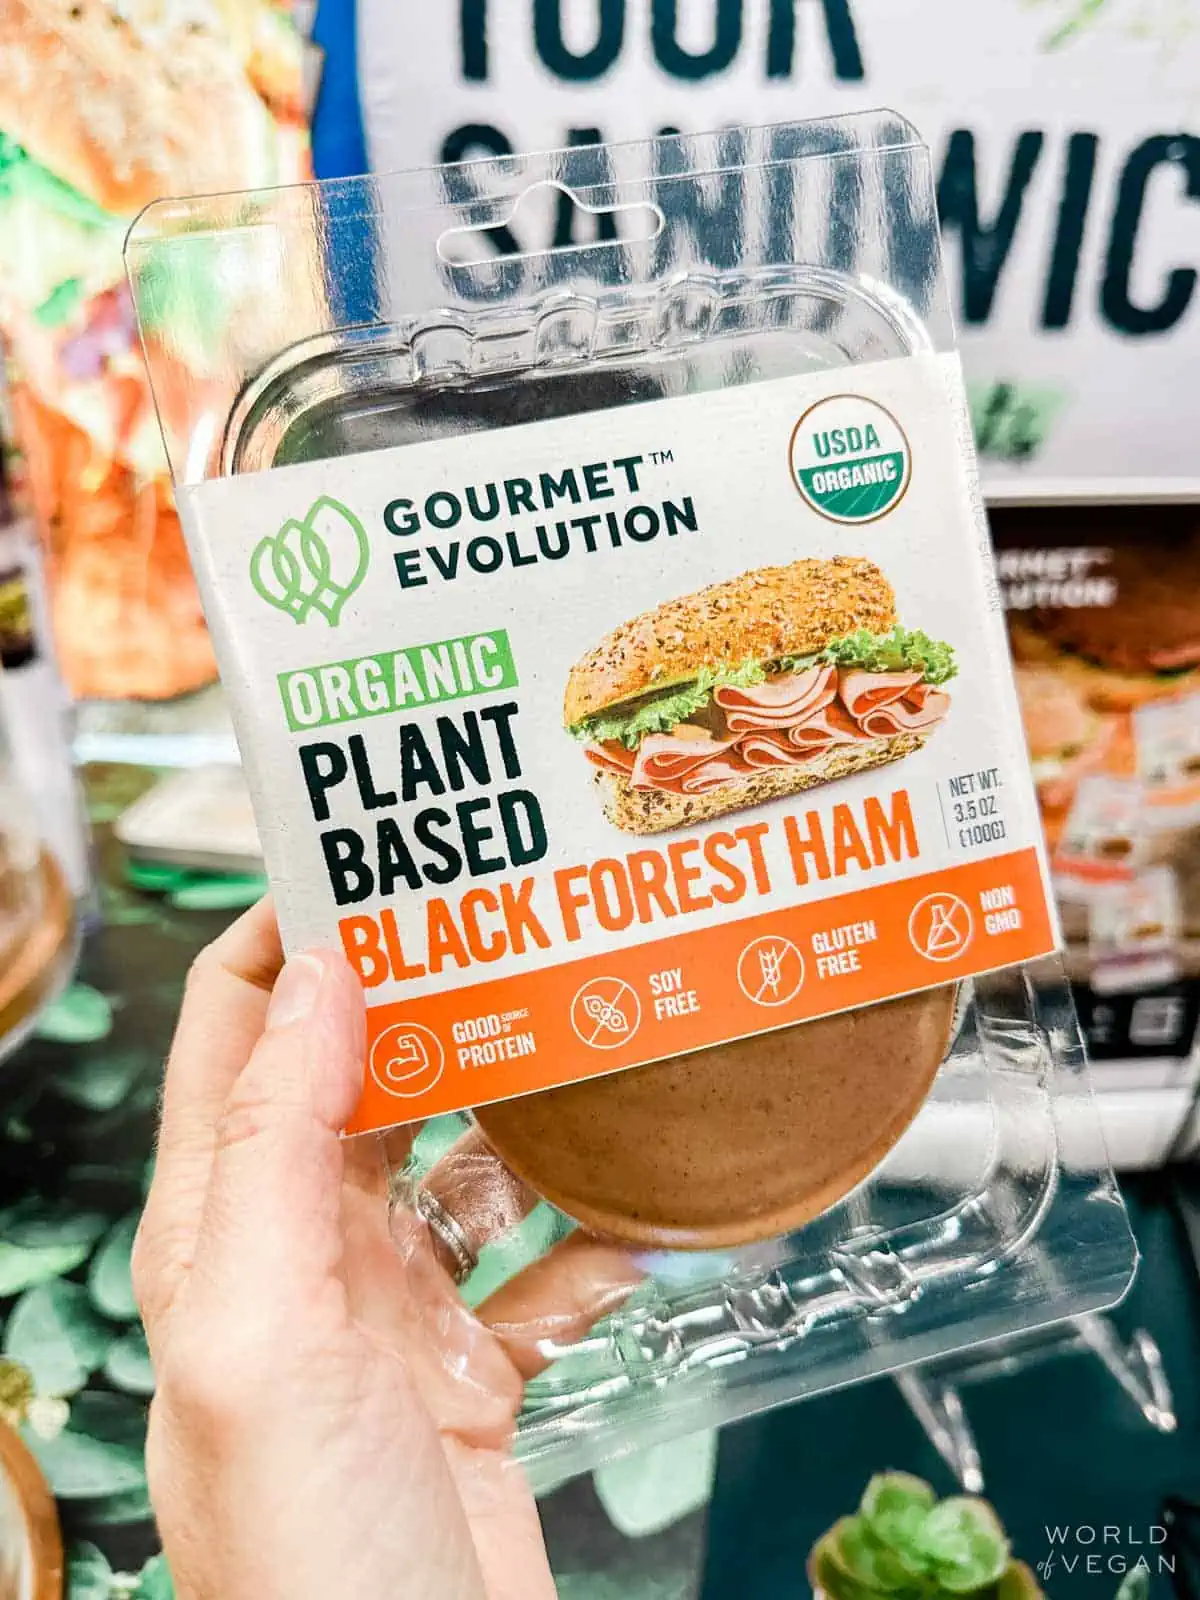 A package of plant-based black forest ham by Gourmet Evolution.